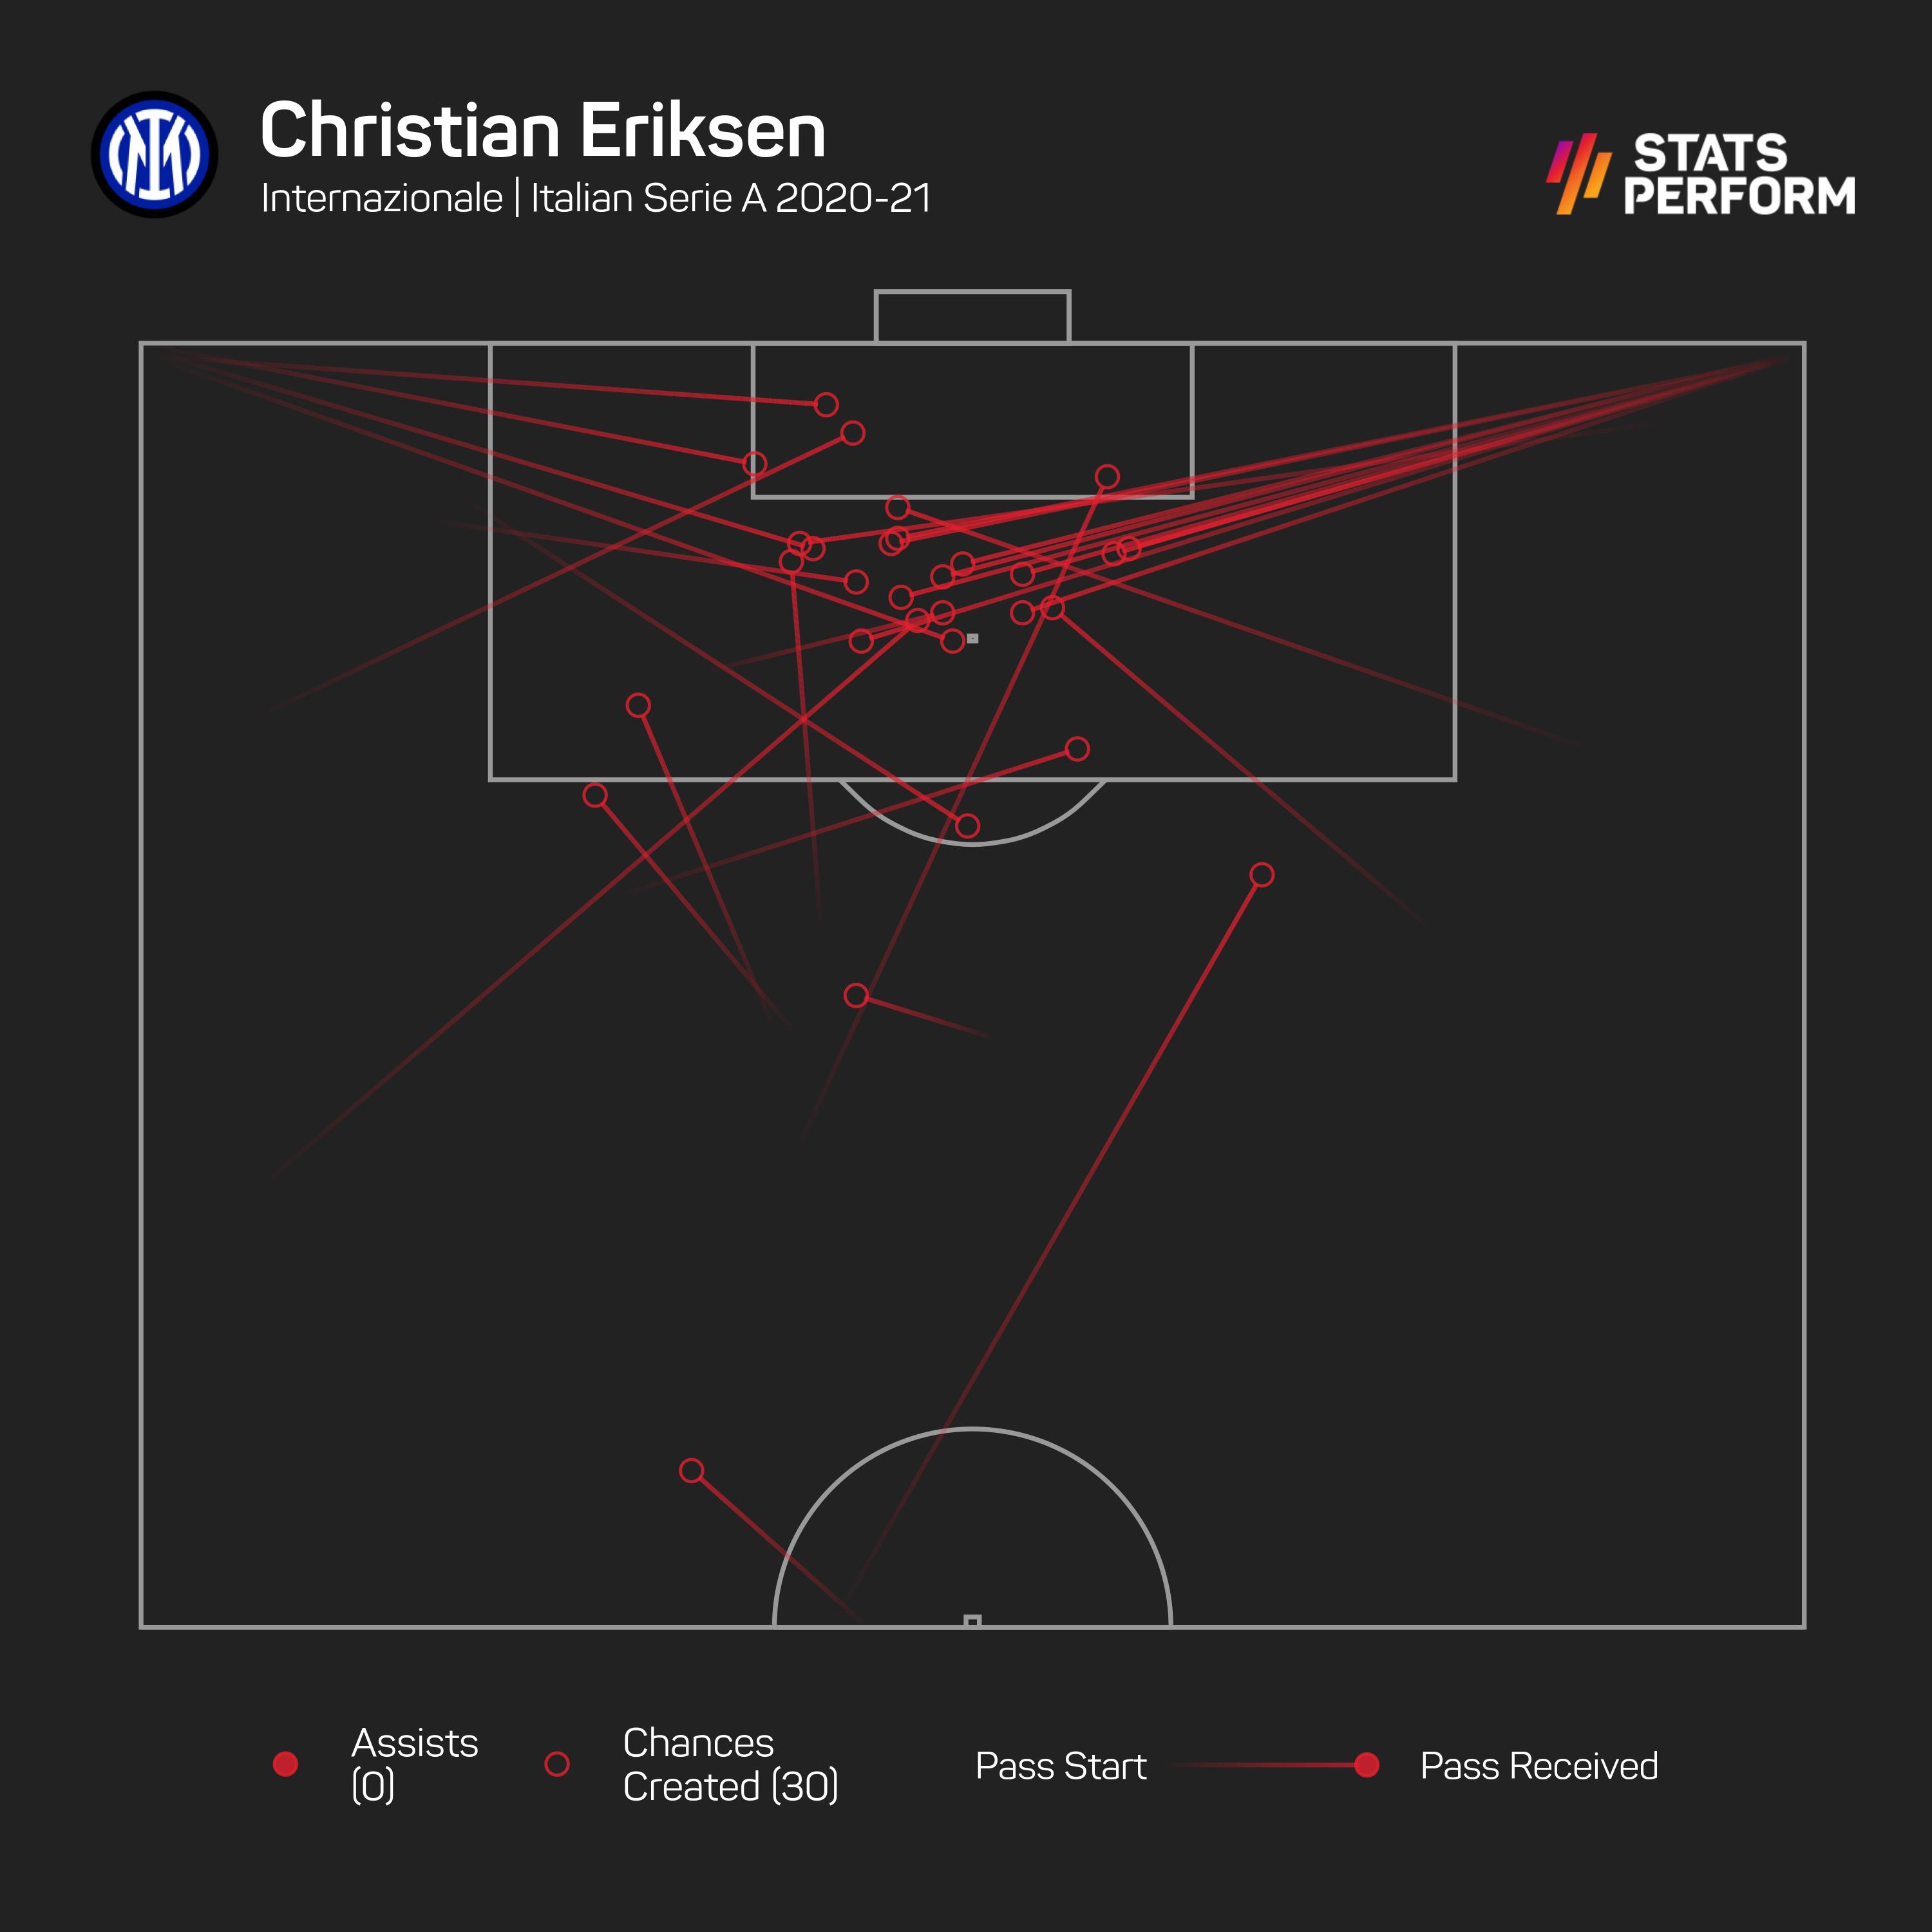 Christian Eriksen helped Inter to the Serie A title in 2020-21